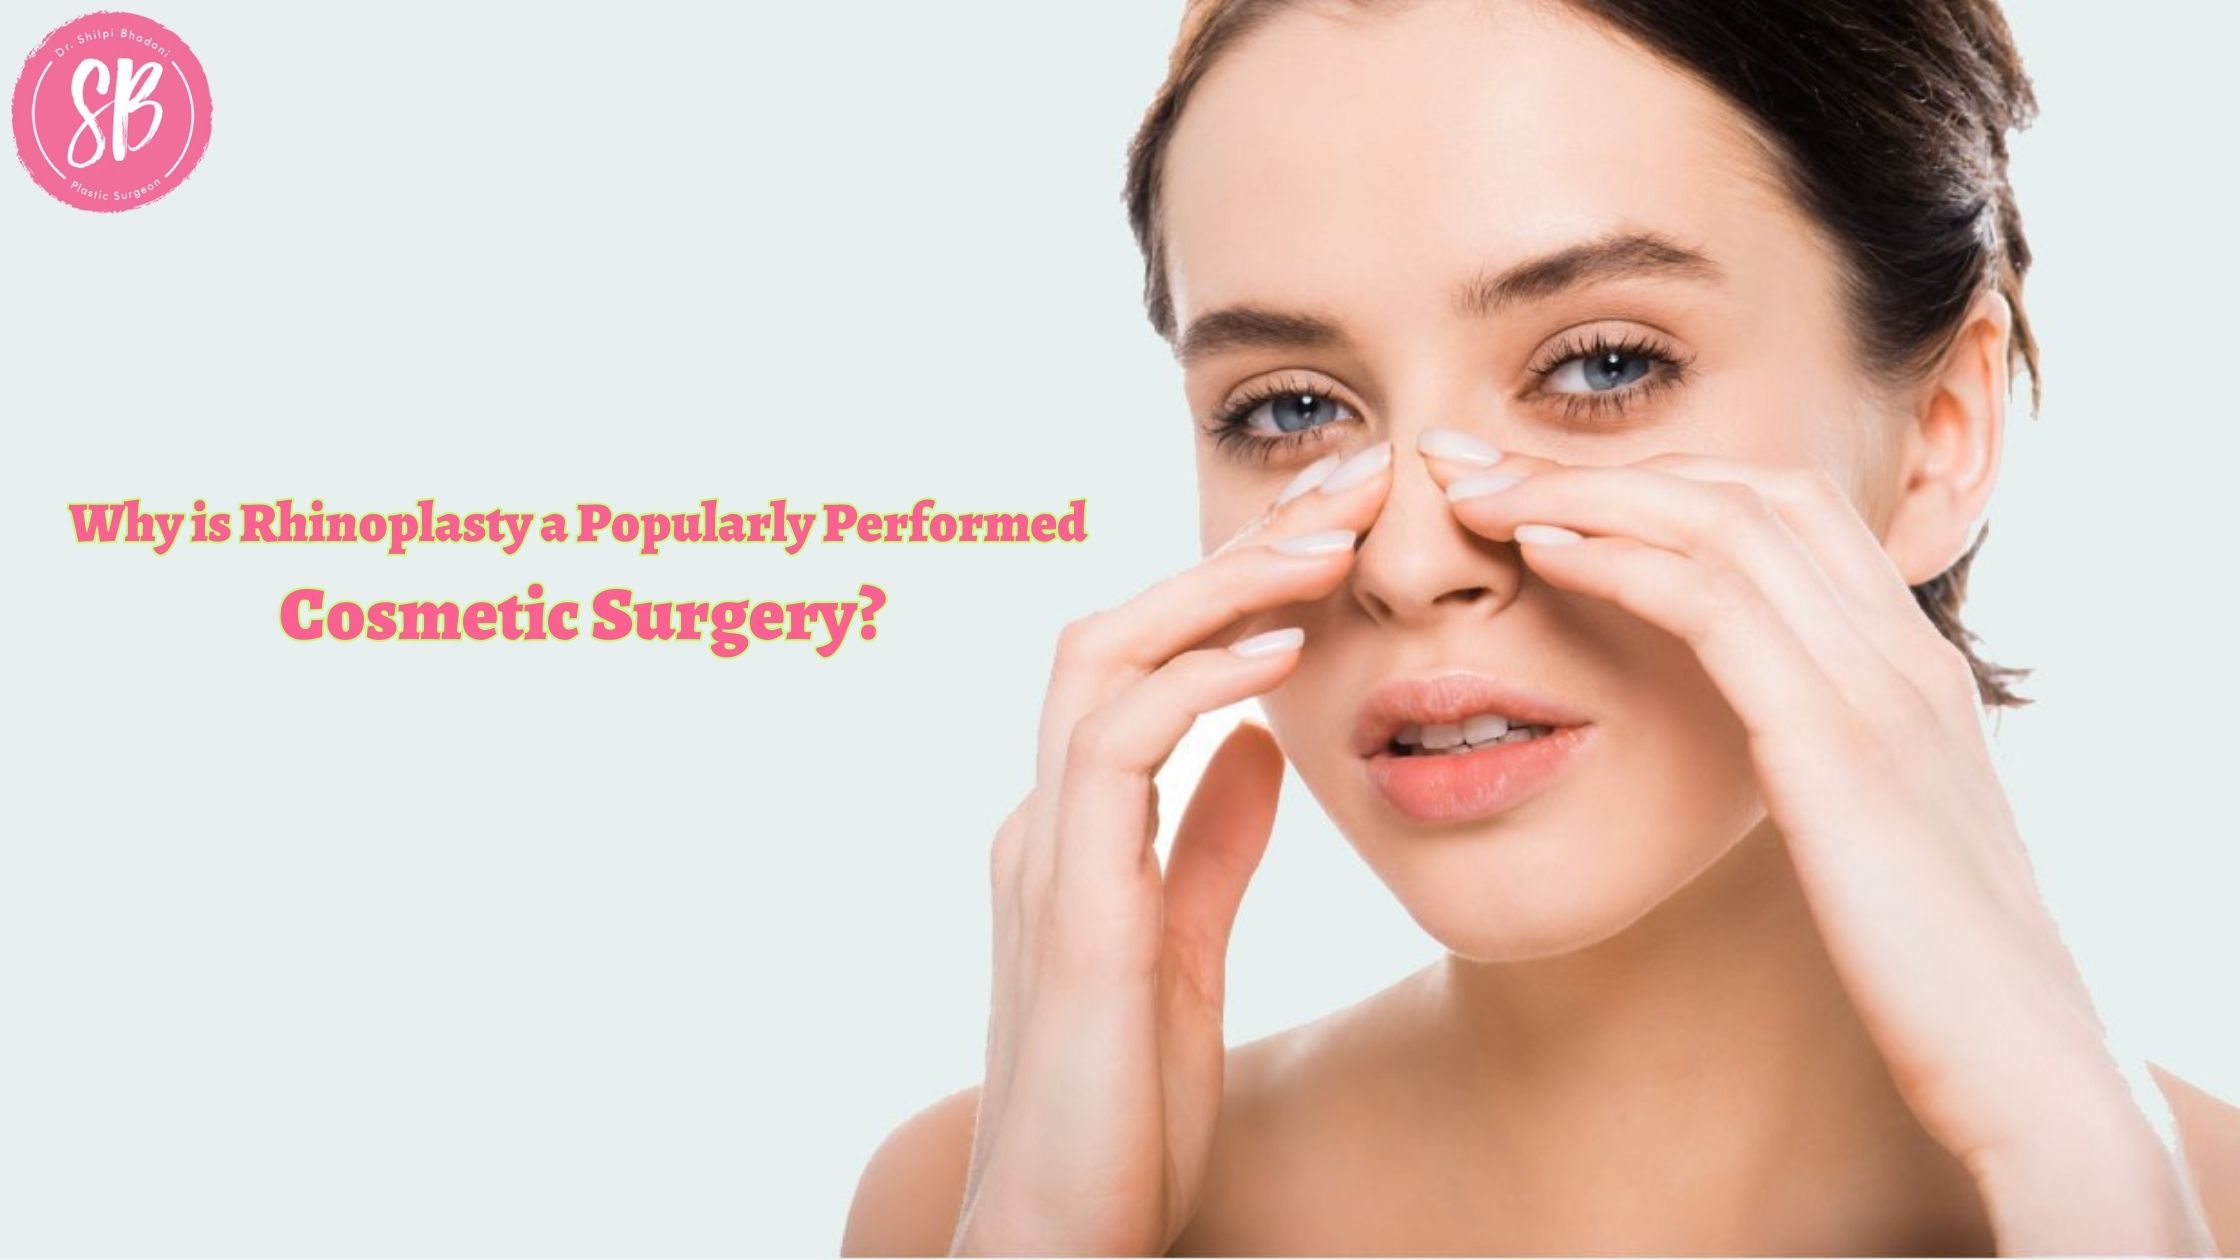 Why is Rhinoplasty a Popularly Performed Cosmetic Surgery